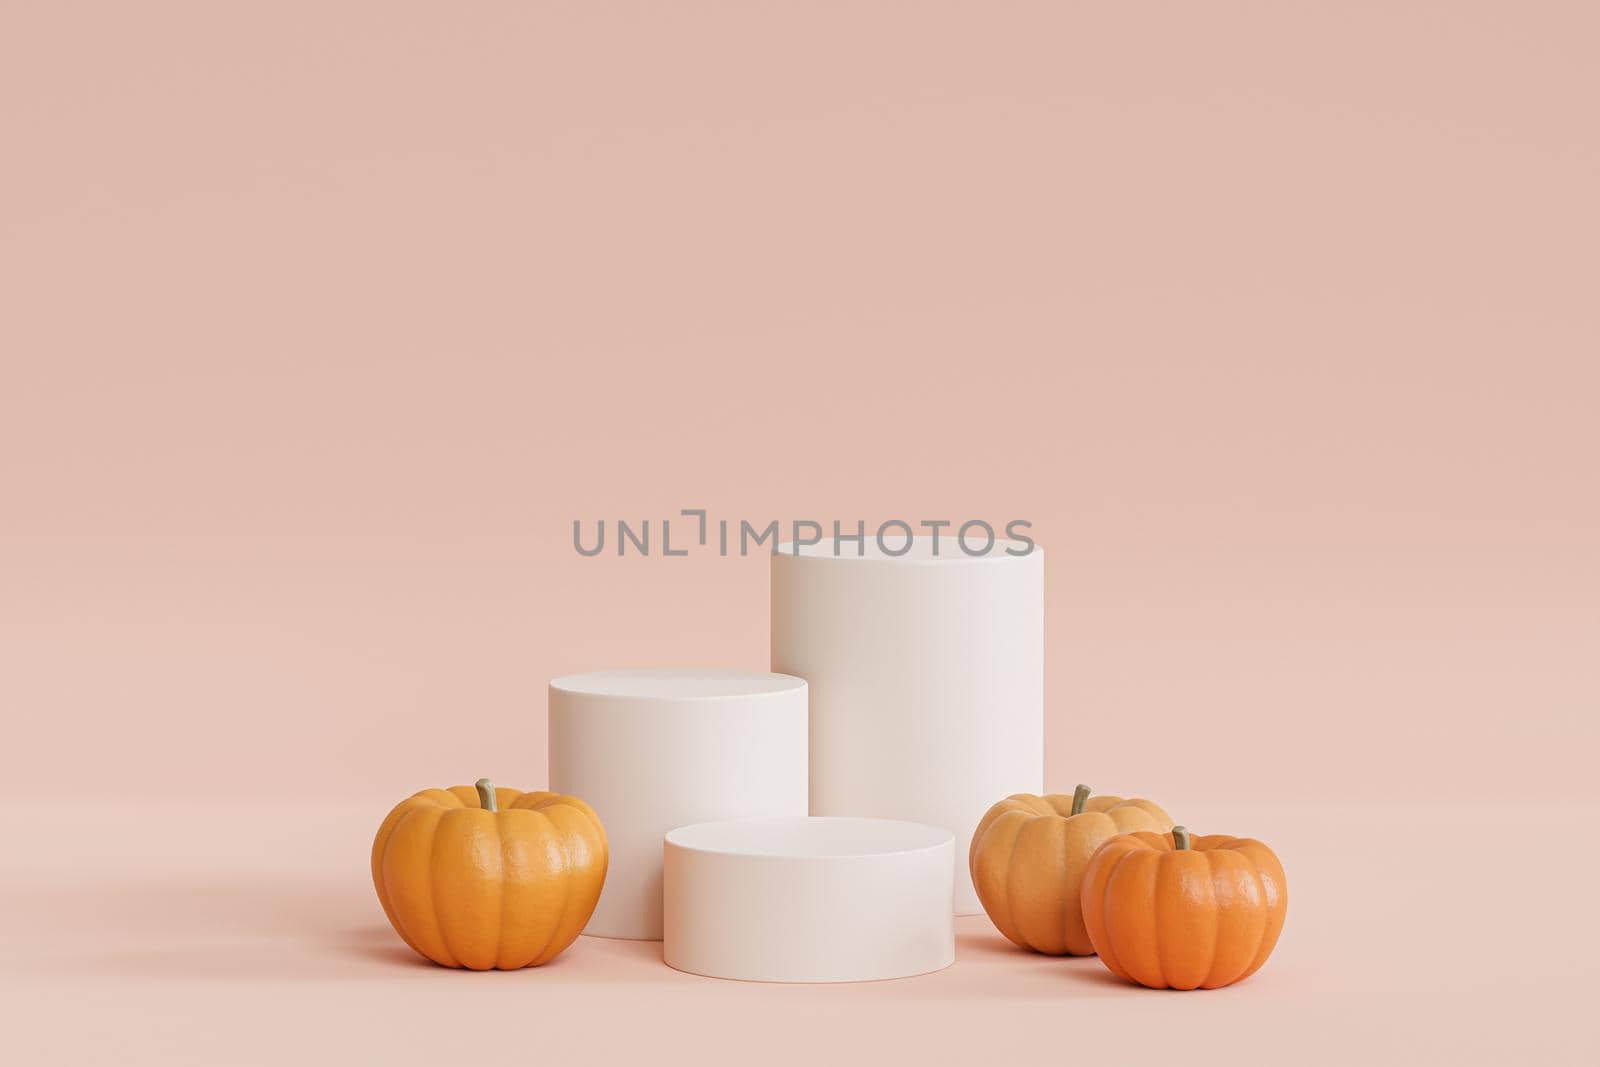 Podium or pedestal with pumpkins for products display or advertising for autumn holidays, 3d render